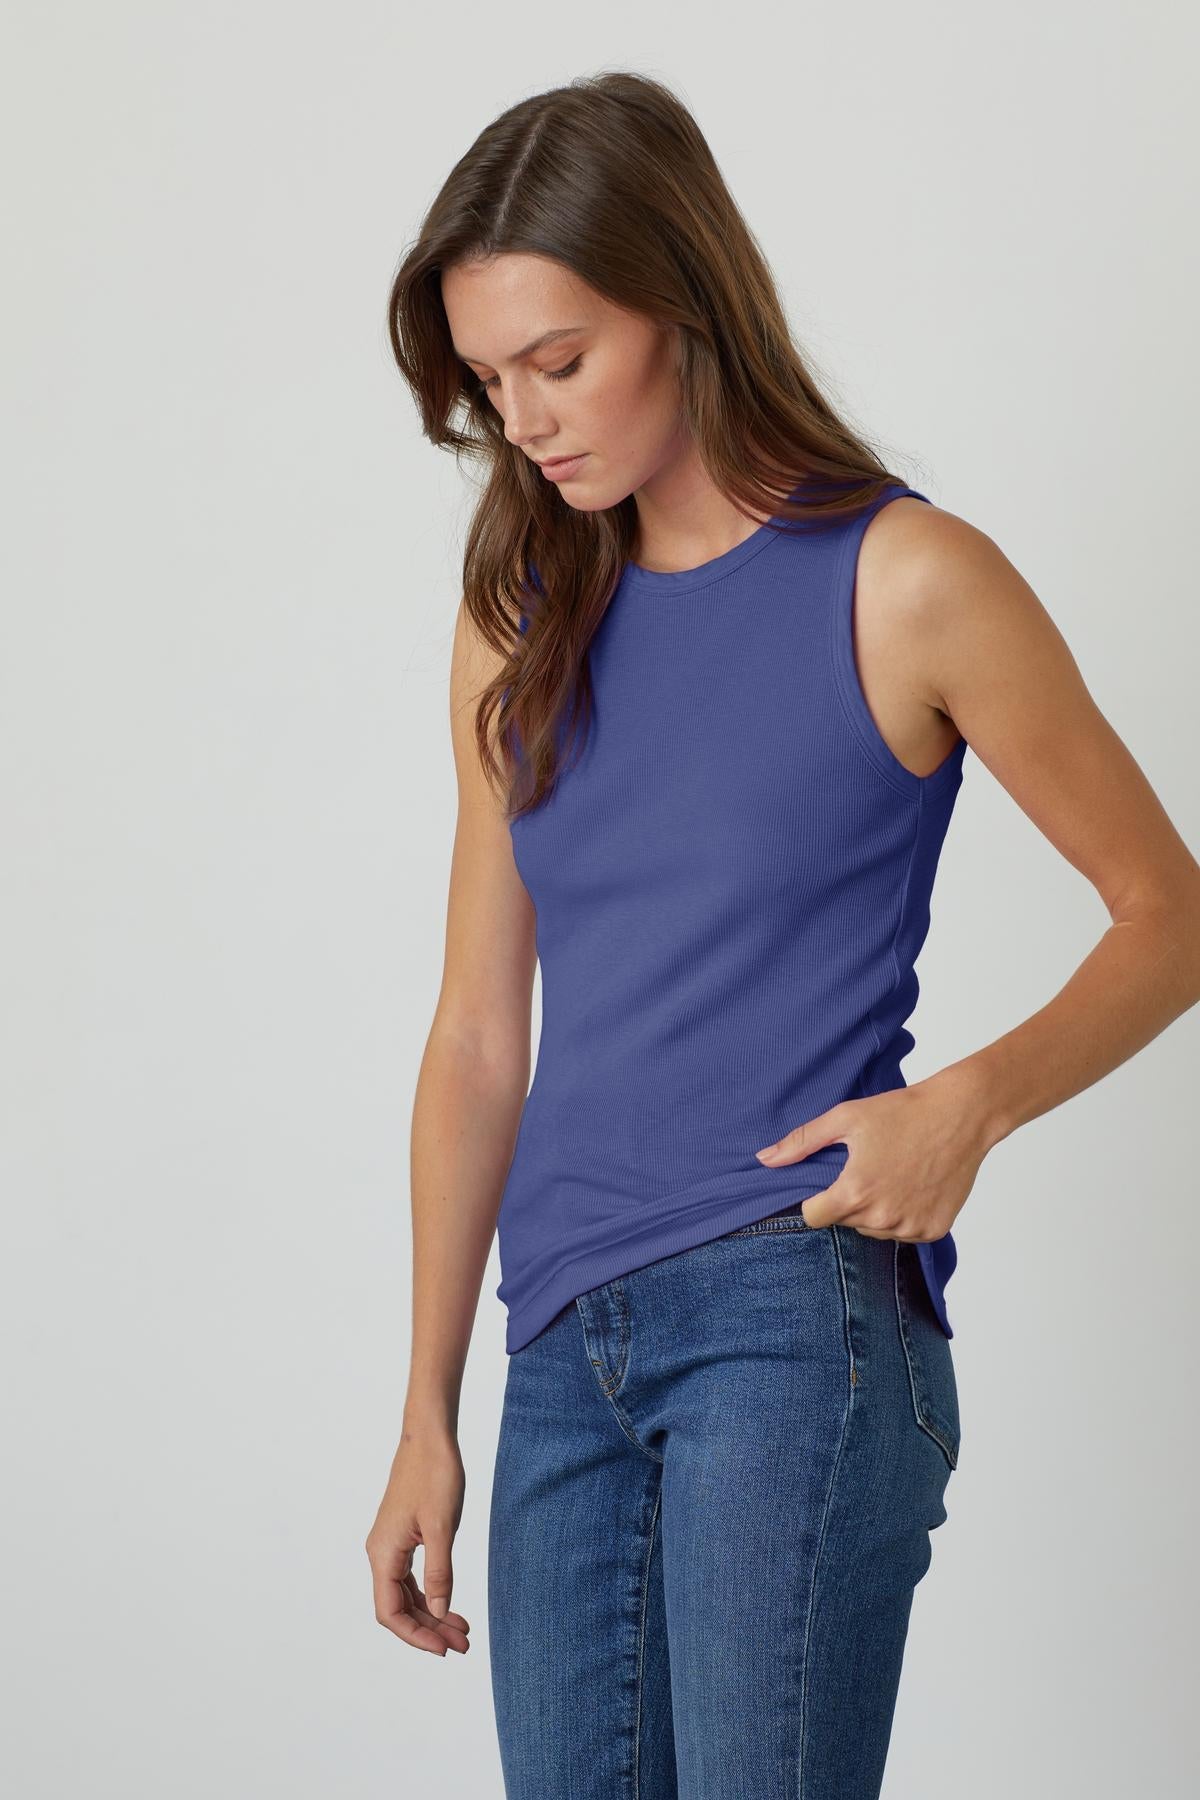 a woman wearing a cavern blue MAXIE RIBBED TANK TOP by Velvet by Graham & Spencer and jeans.-35206385926337